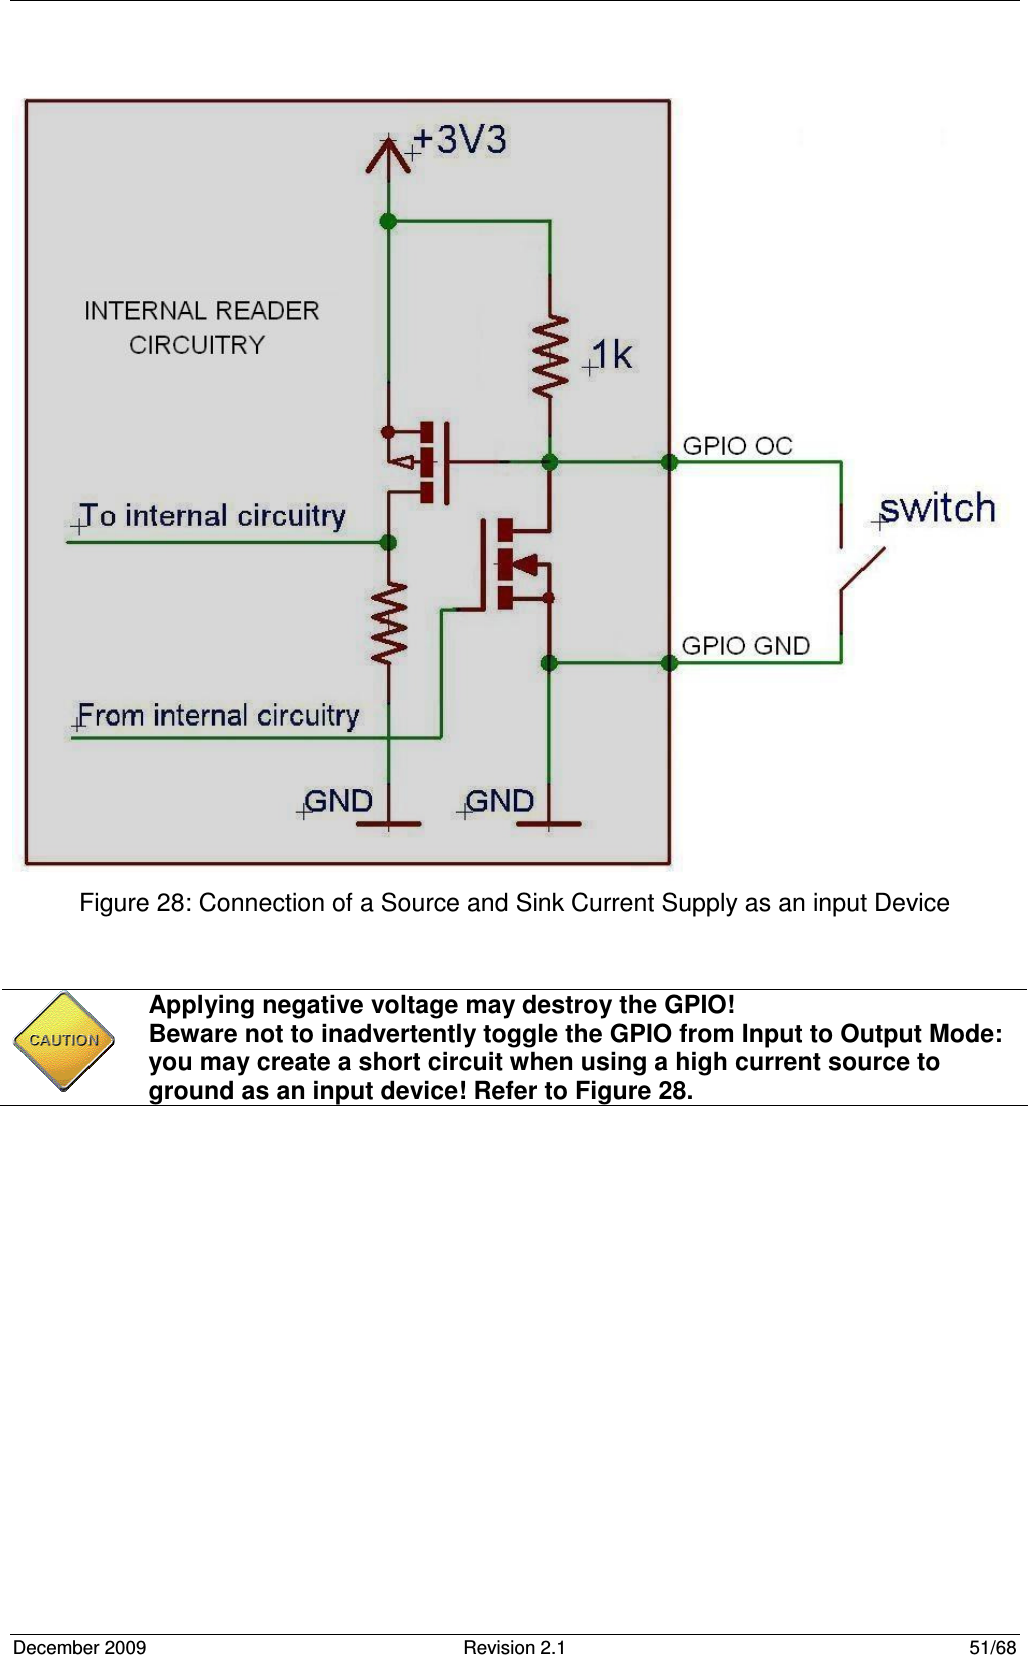  December 2009  Revision 2.1  51/68  Figure 28: Connection of a Source and Sink Current Supply as an input Device     Applying negative voltage may destroy the GPIO! Beware not to inadvertently toggle the GPIO from Input to Output Mode: you may create a short circuit when using a high current source to ground as an input device! Refer to Figure 28. 